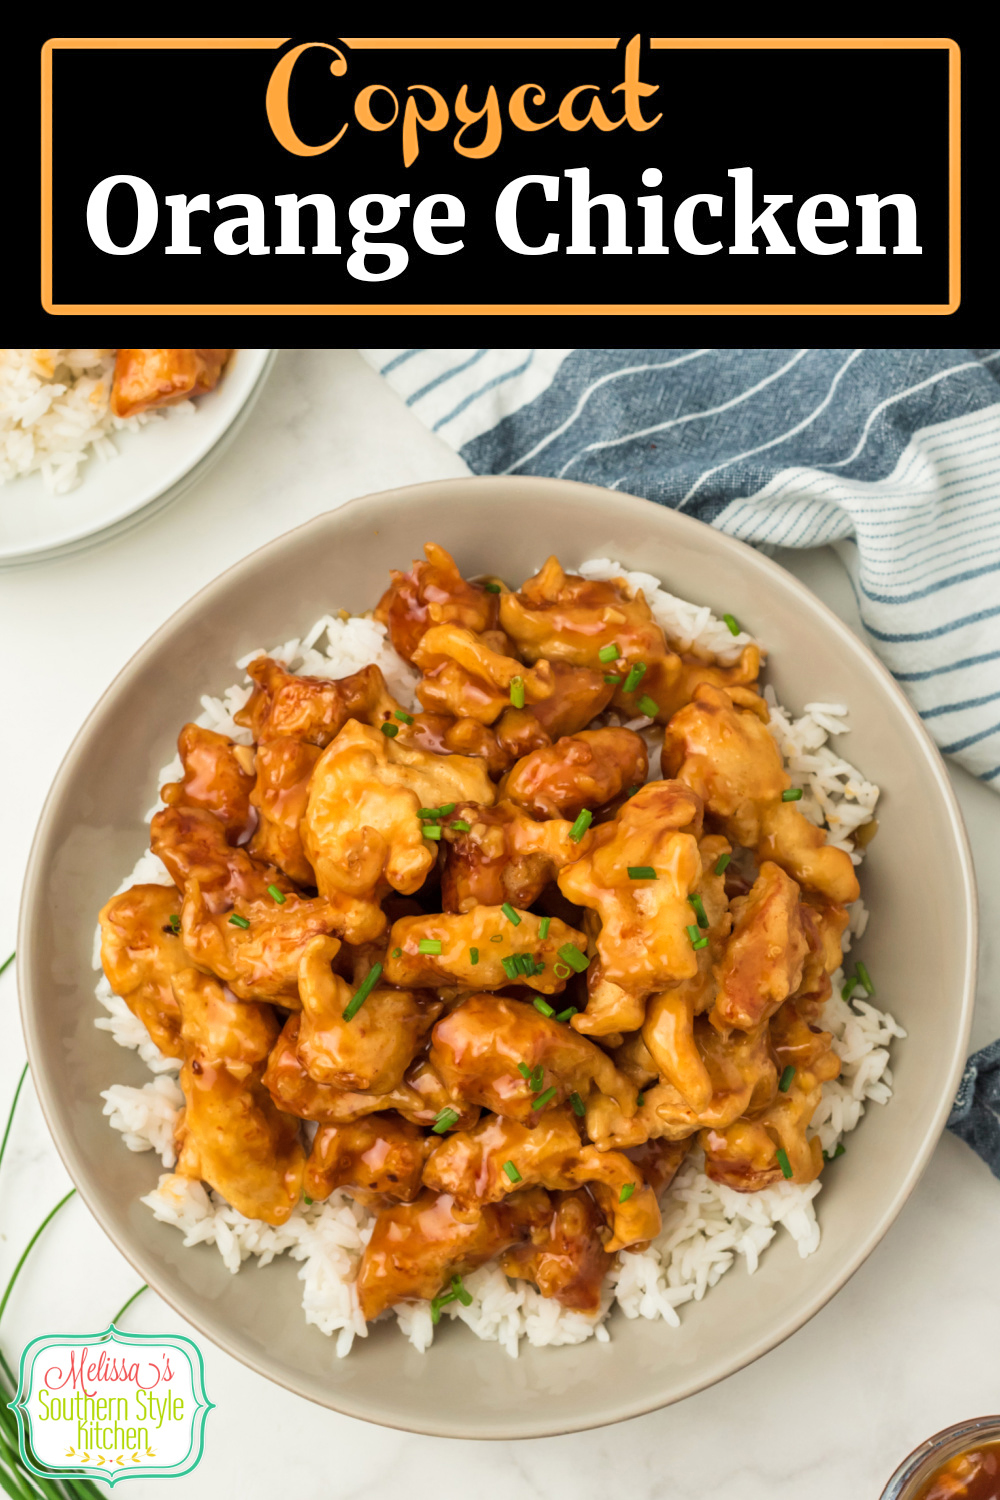 Saved money and time and make your own copycat Panda Express Orange Chicken at home #orangechicken #copycatrecipes #easychickenrecipes #asianchicken #pandaexpresschicken #orangesauce #easyorangechicken via @melissasssk